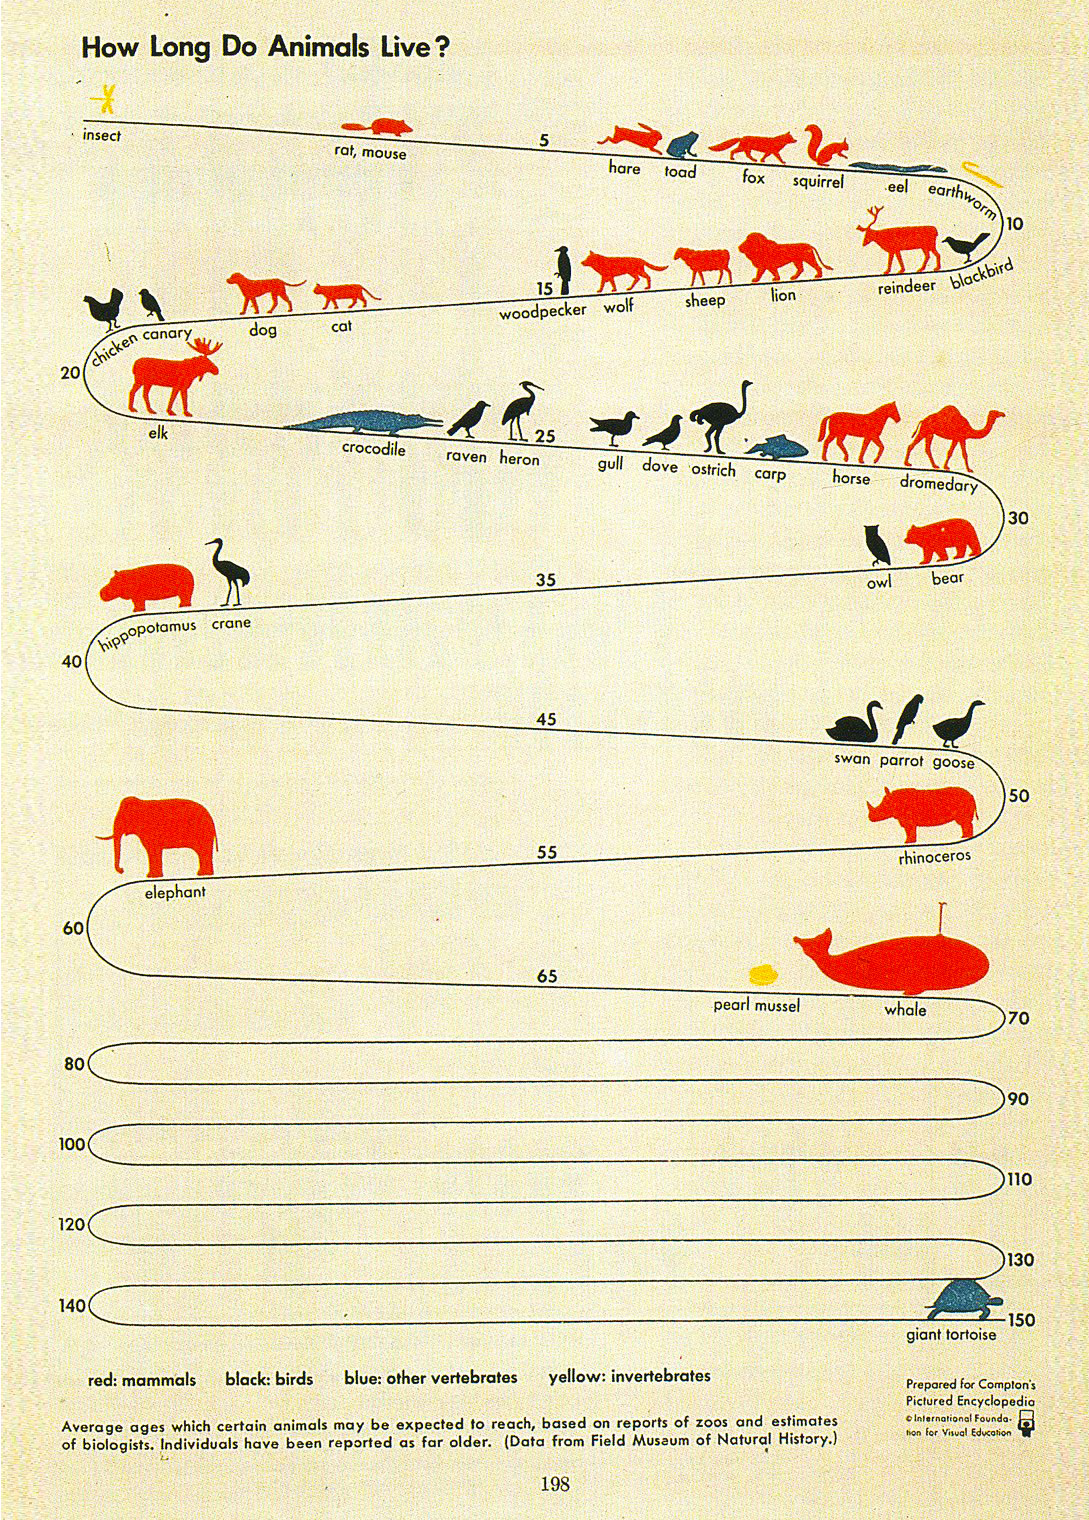 How Long Do Animals Live by Gerd Arntz 1939 - Vintage infographic